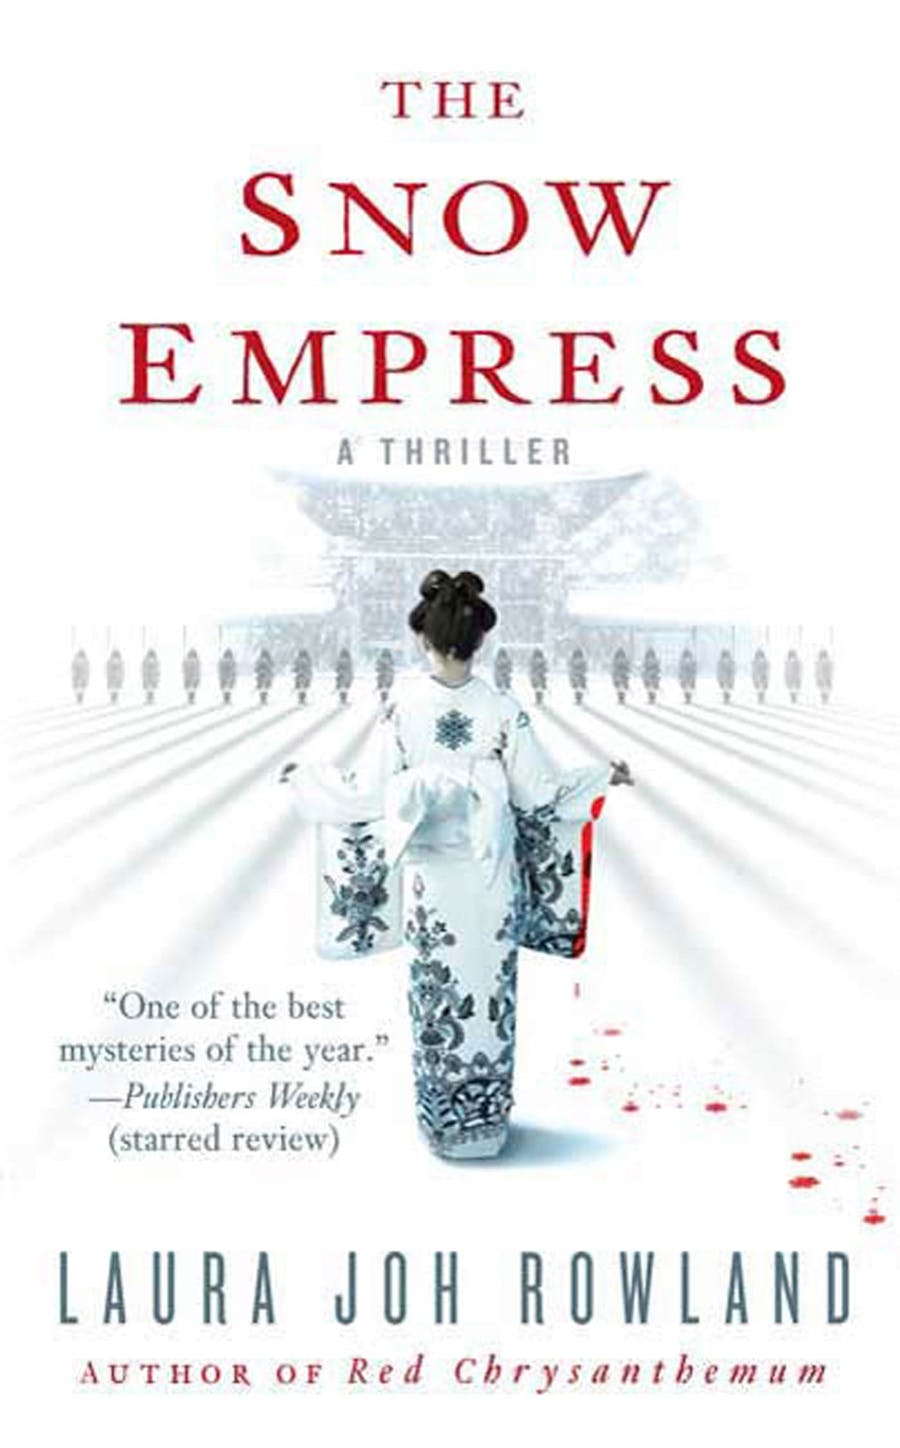 The Snow Empress by Laura Joh Rowland